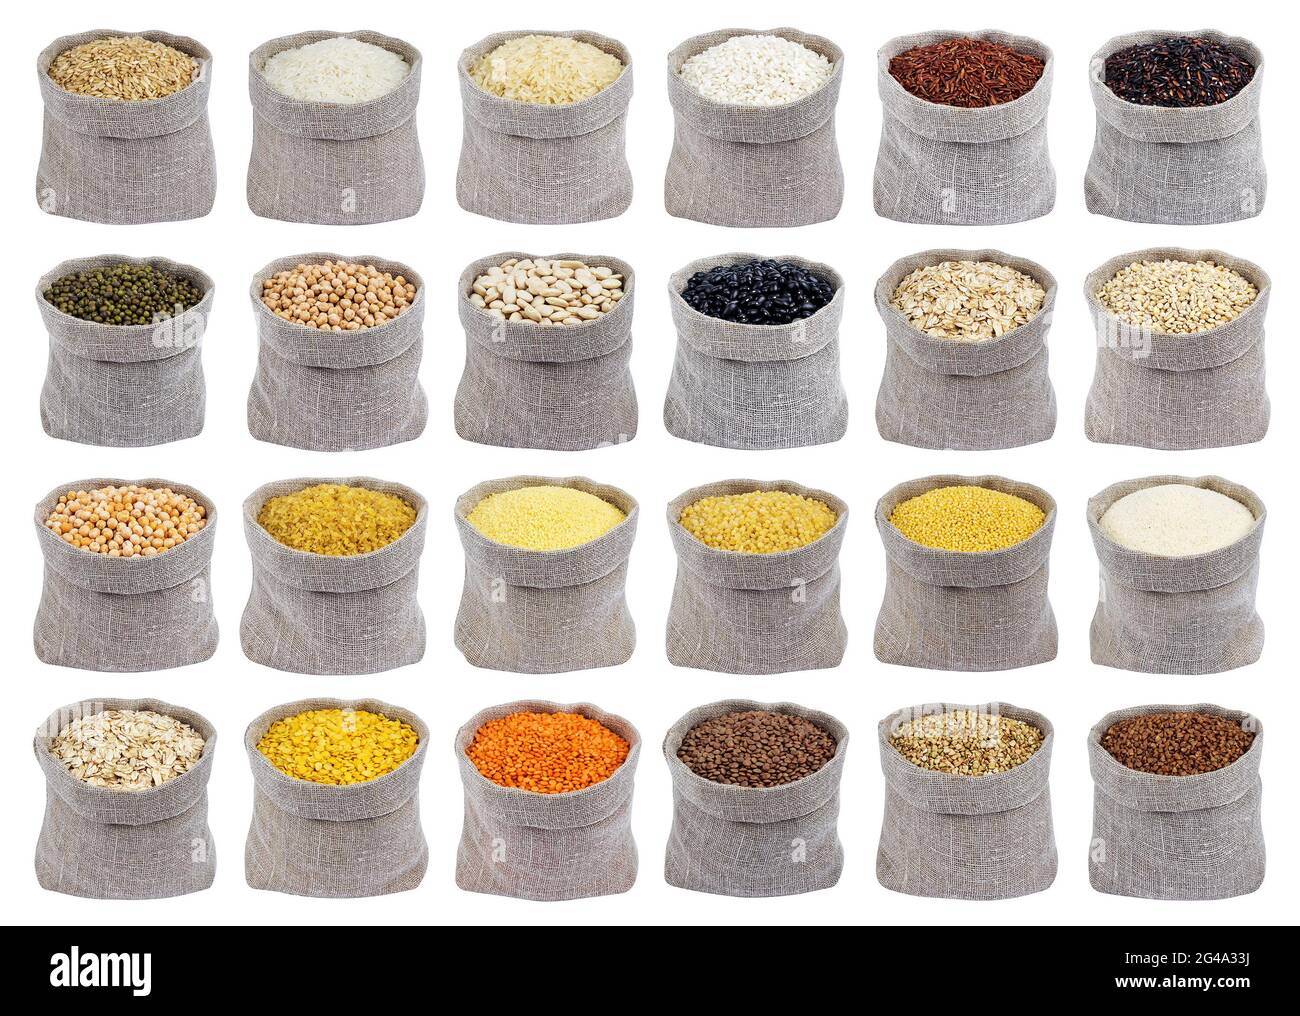 Collection Of Different Cereals Grains And Flakes In Bags Isolated On